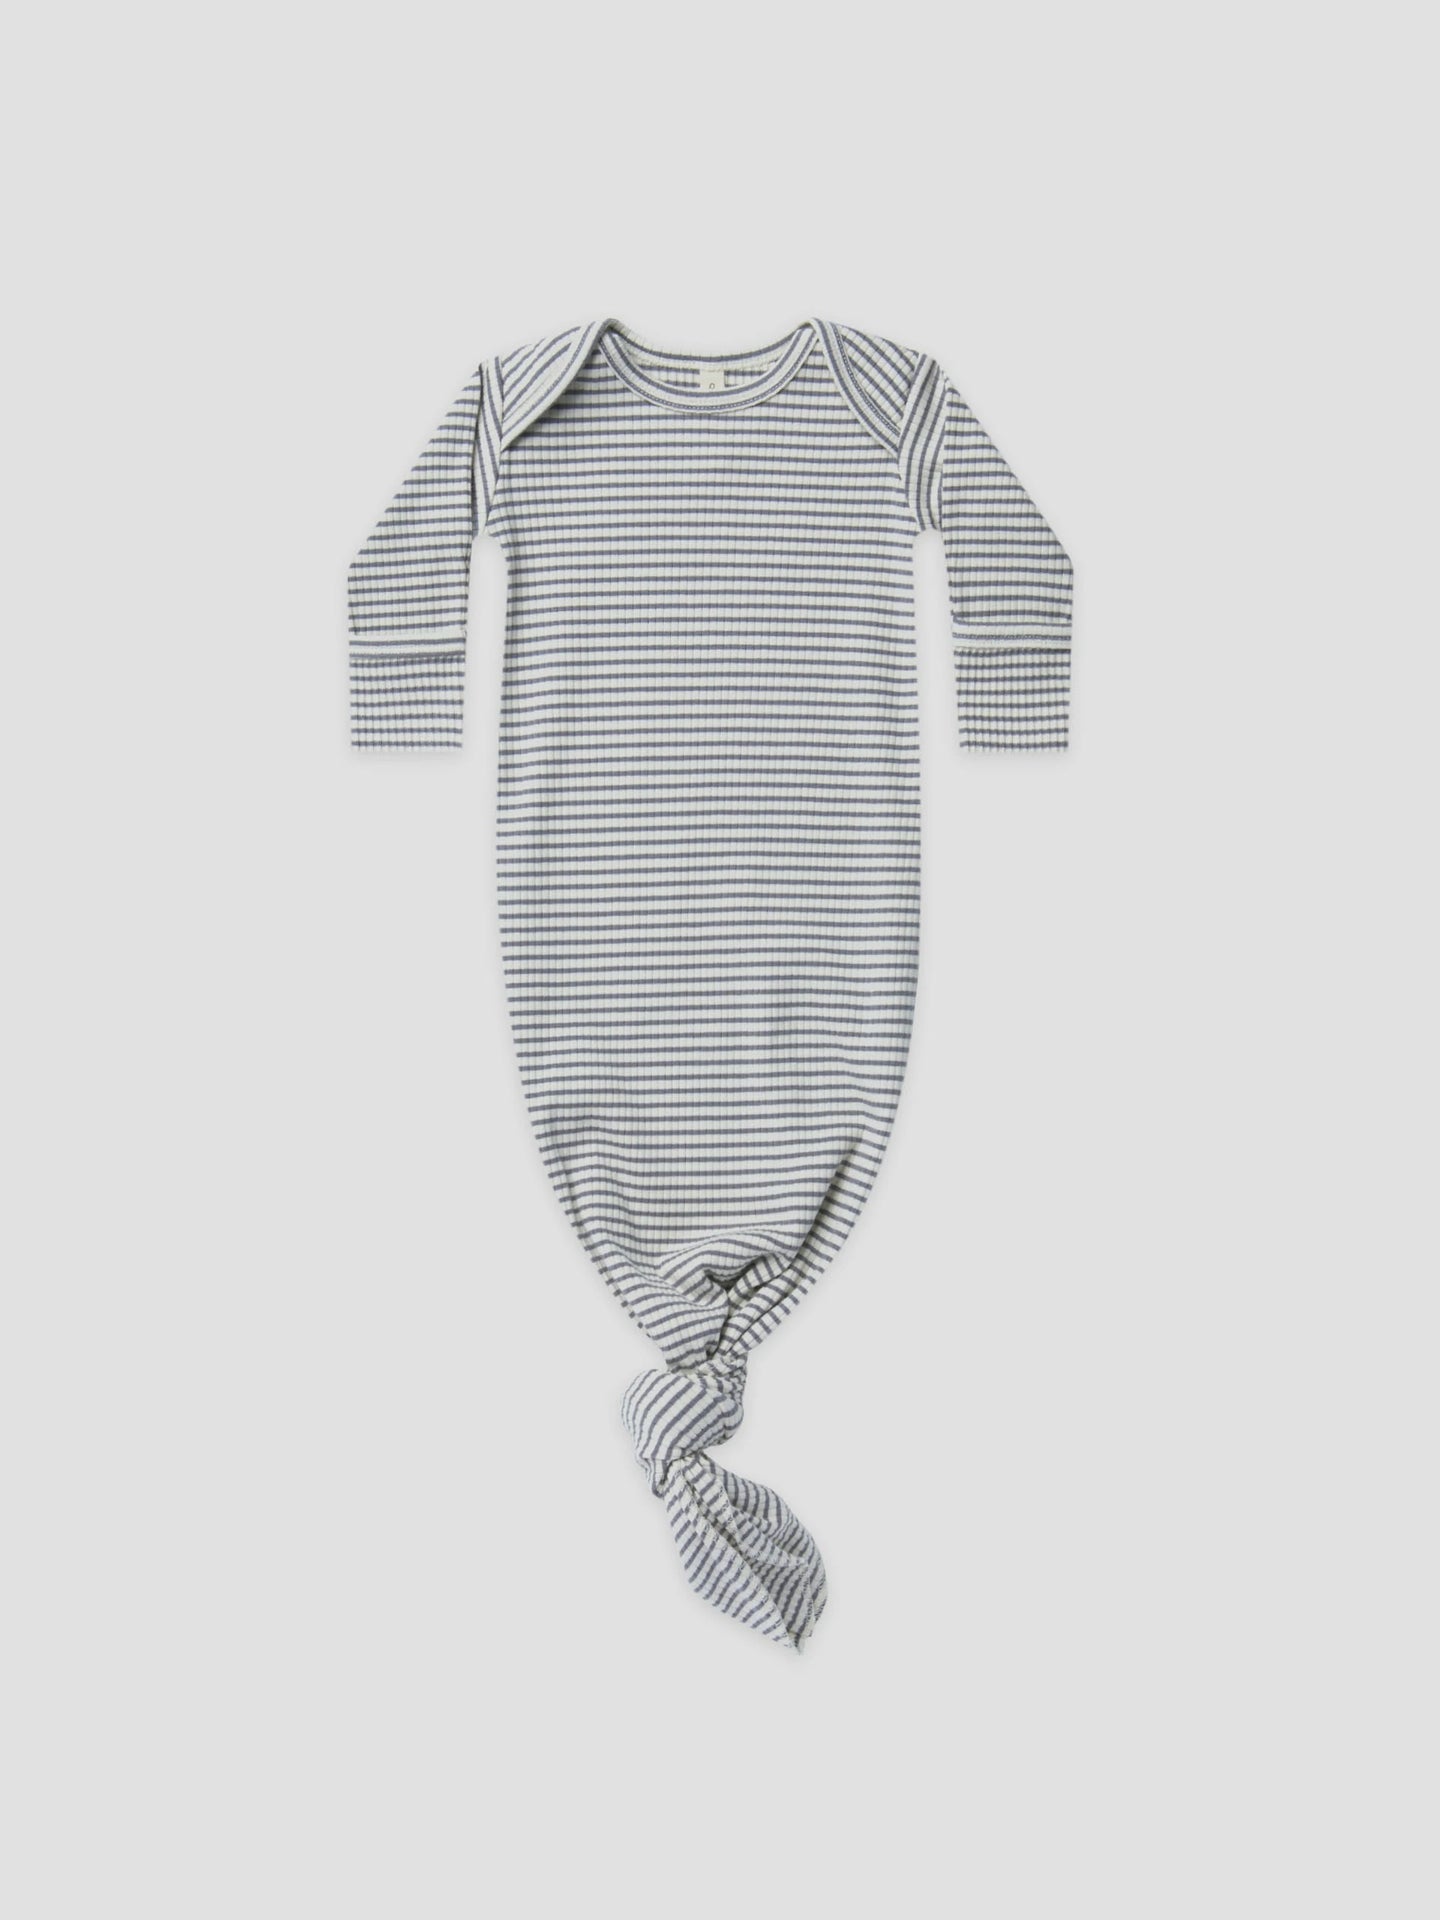 Quincy Mae - Organic Knotted Baby Gown - Indigo Stripe